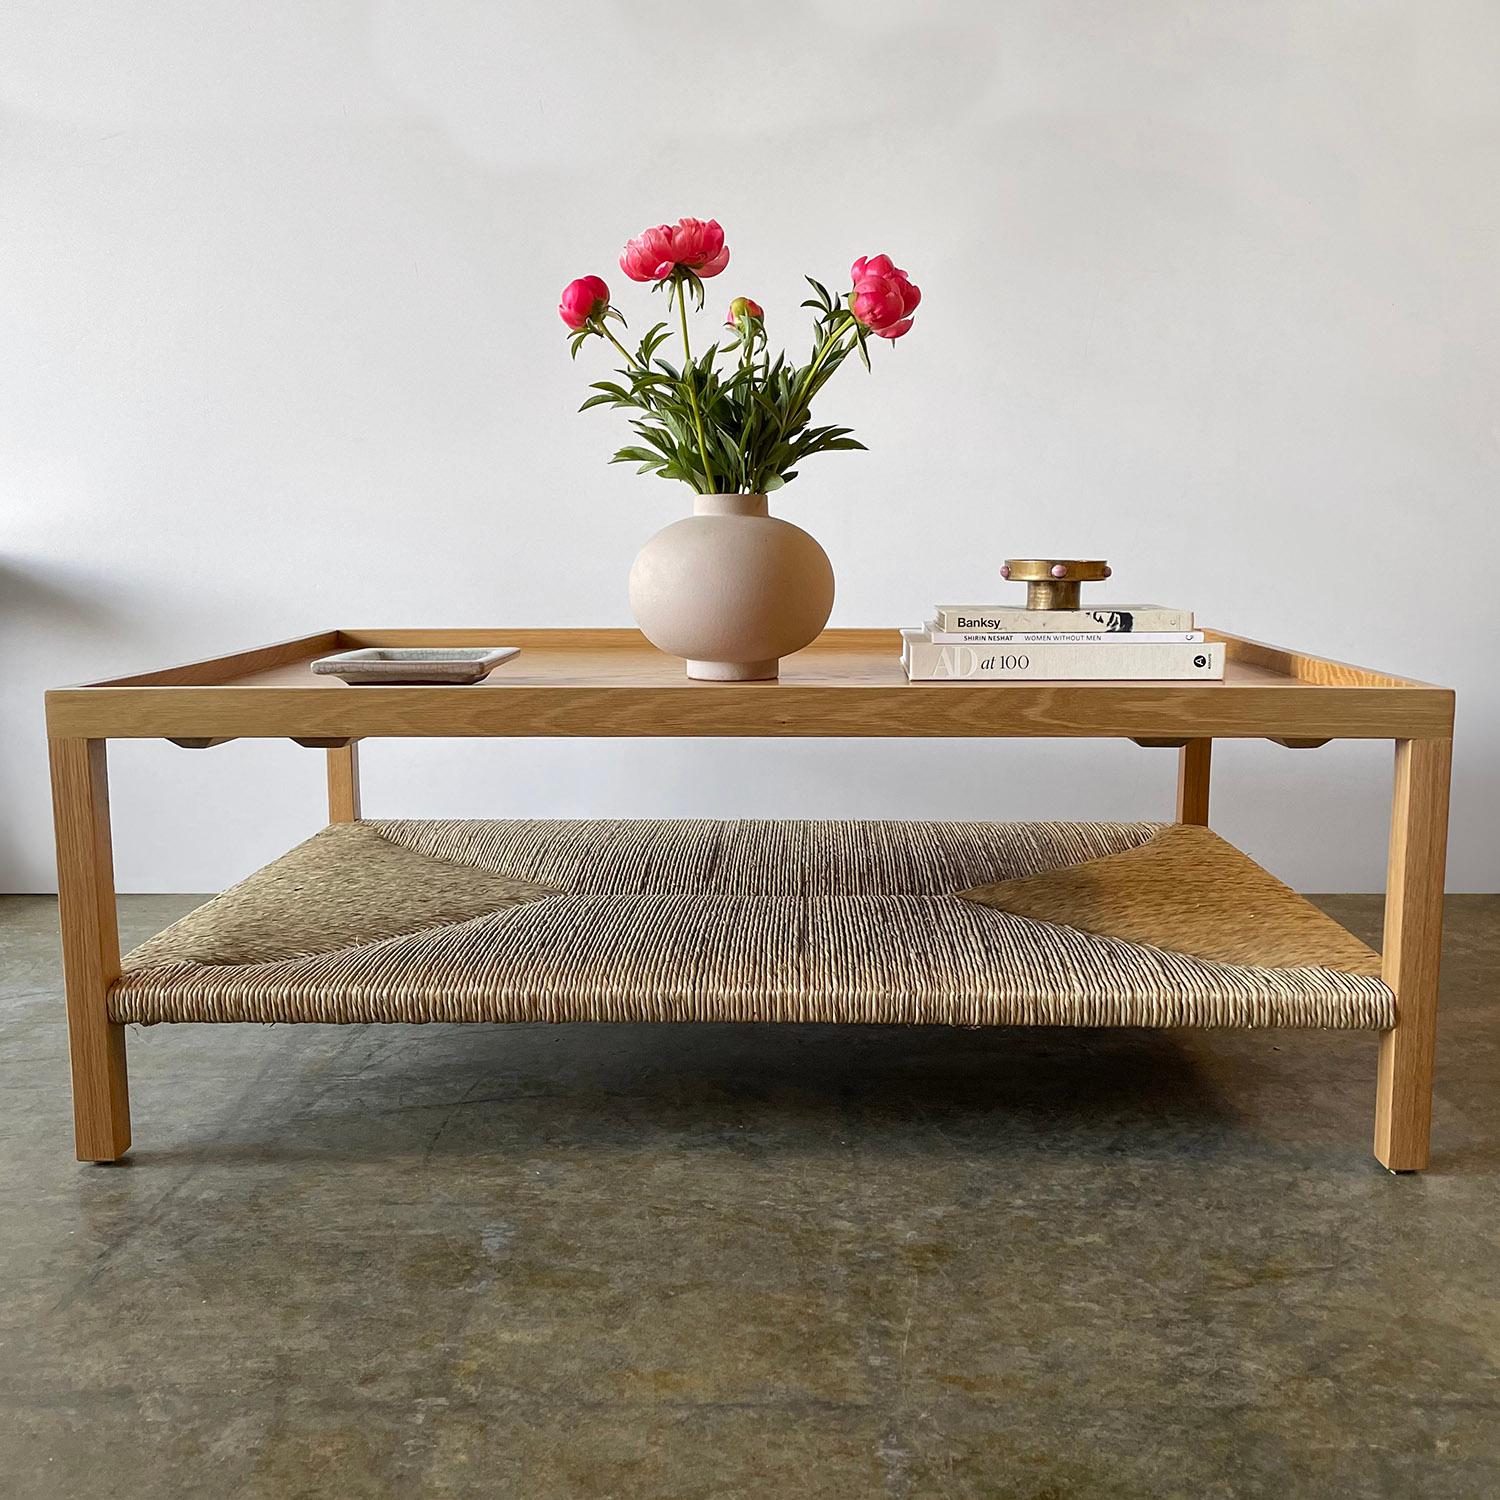 White oak & rush coffee table by Amber Interiors
Made of solid oak wood in a natural finish
Wonderful grain detail
Lipped edge 
Lower tier is handwoven rush 
Arcadia Coffee Table is a new production item
Made in Los Angeles by Amber Interiors